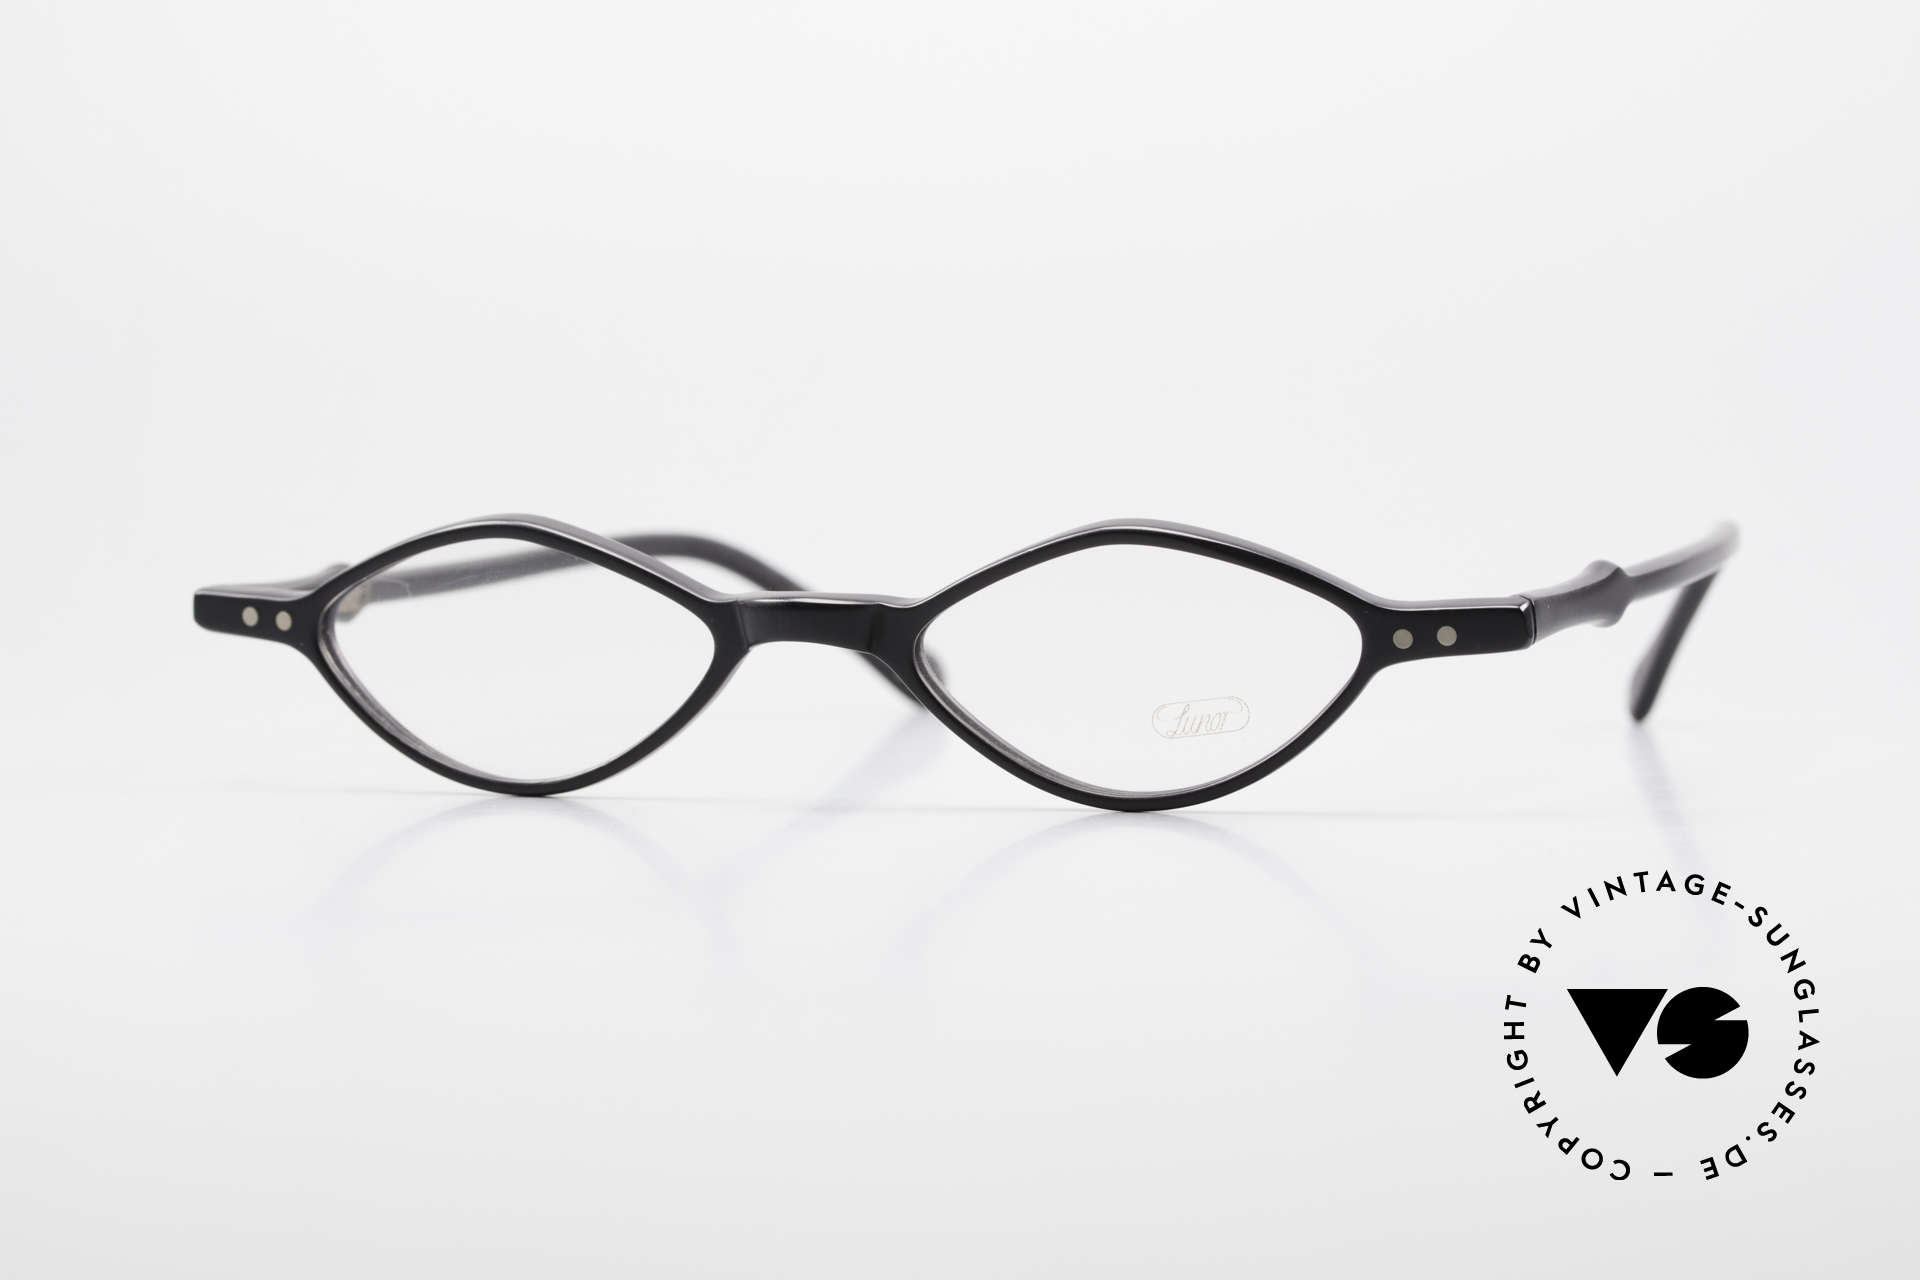 Lunor A44 Reading Glasses Acetate Frame, LUNOR glasses, model 44 from the Acetate collection, Made for Men and Women